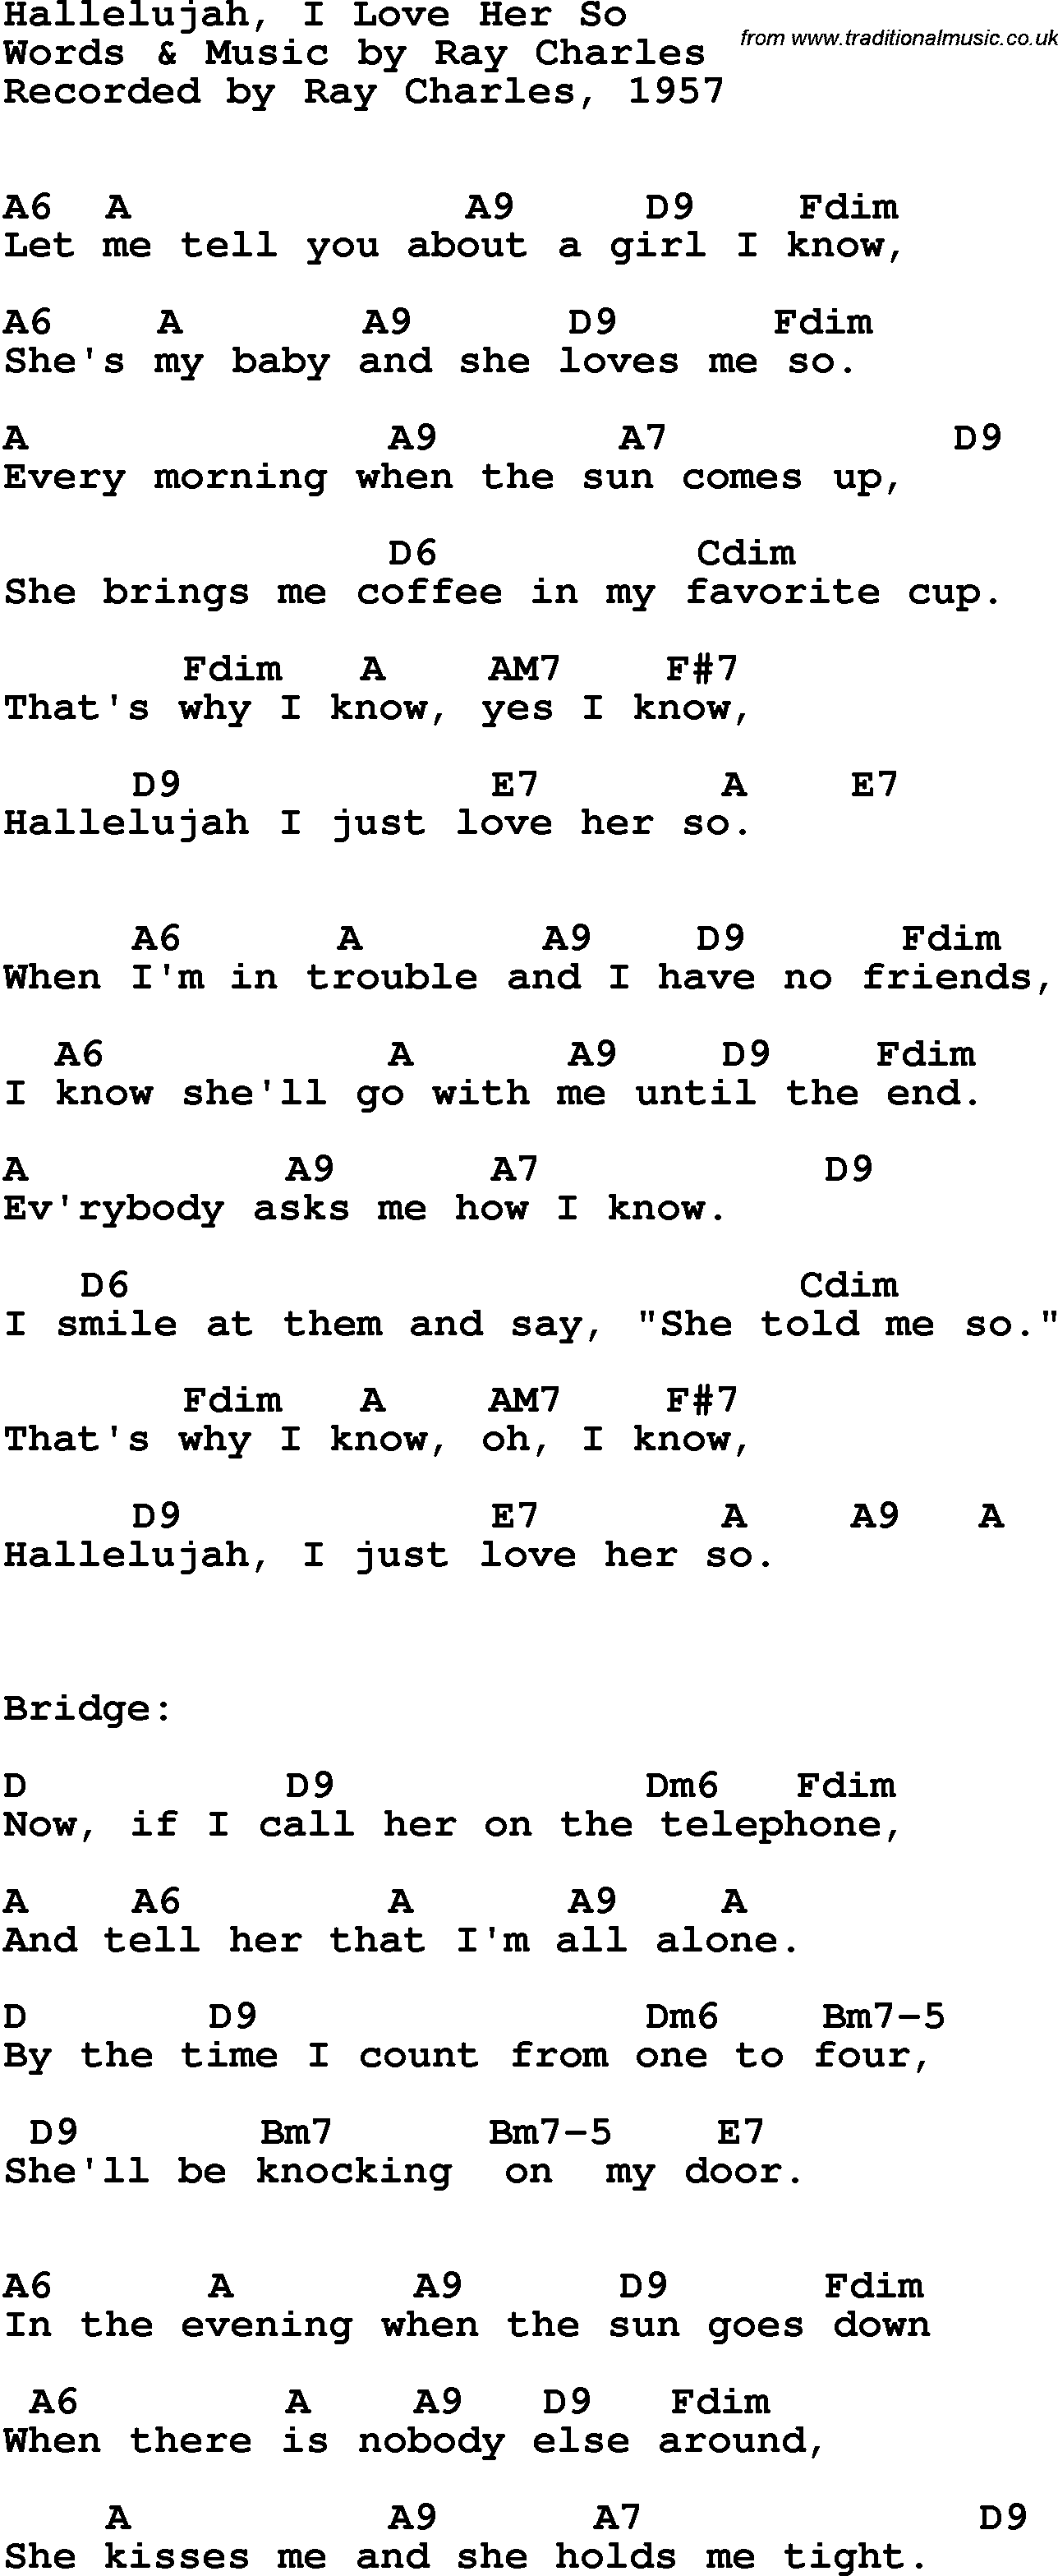 Song Lyrics with guitar chords for Hallelujah, I Love Her So - Ray Charles, 1959